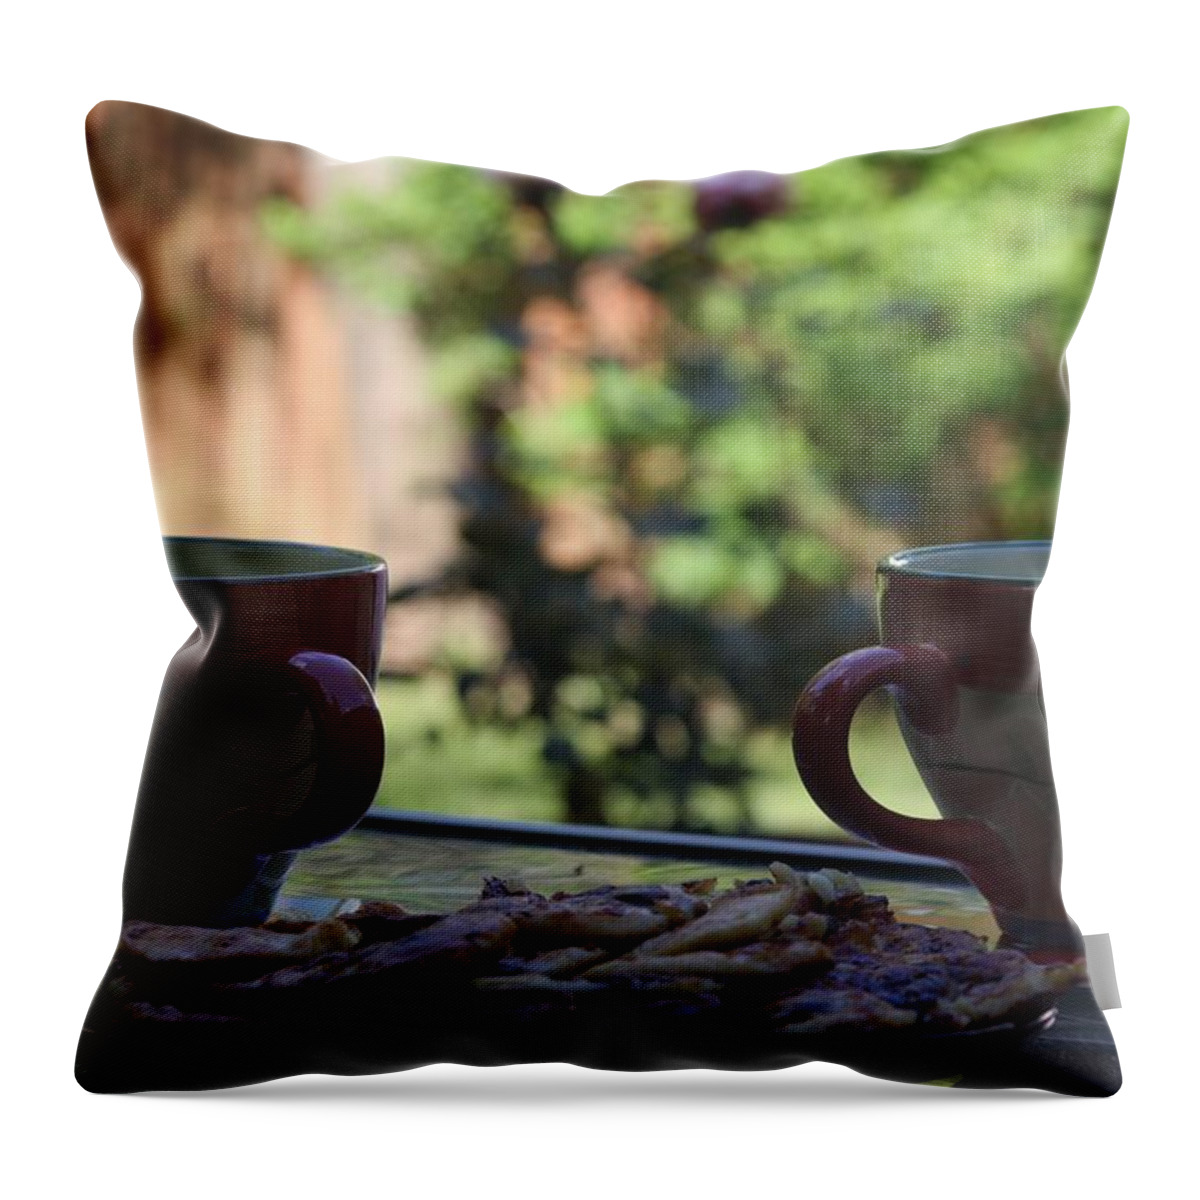 Breakfast Throw Pillow featuring the photograph Breakfast Time by Vadim Levin